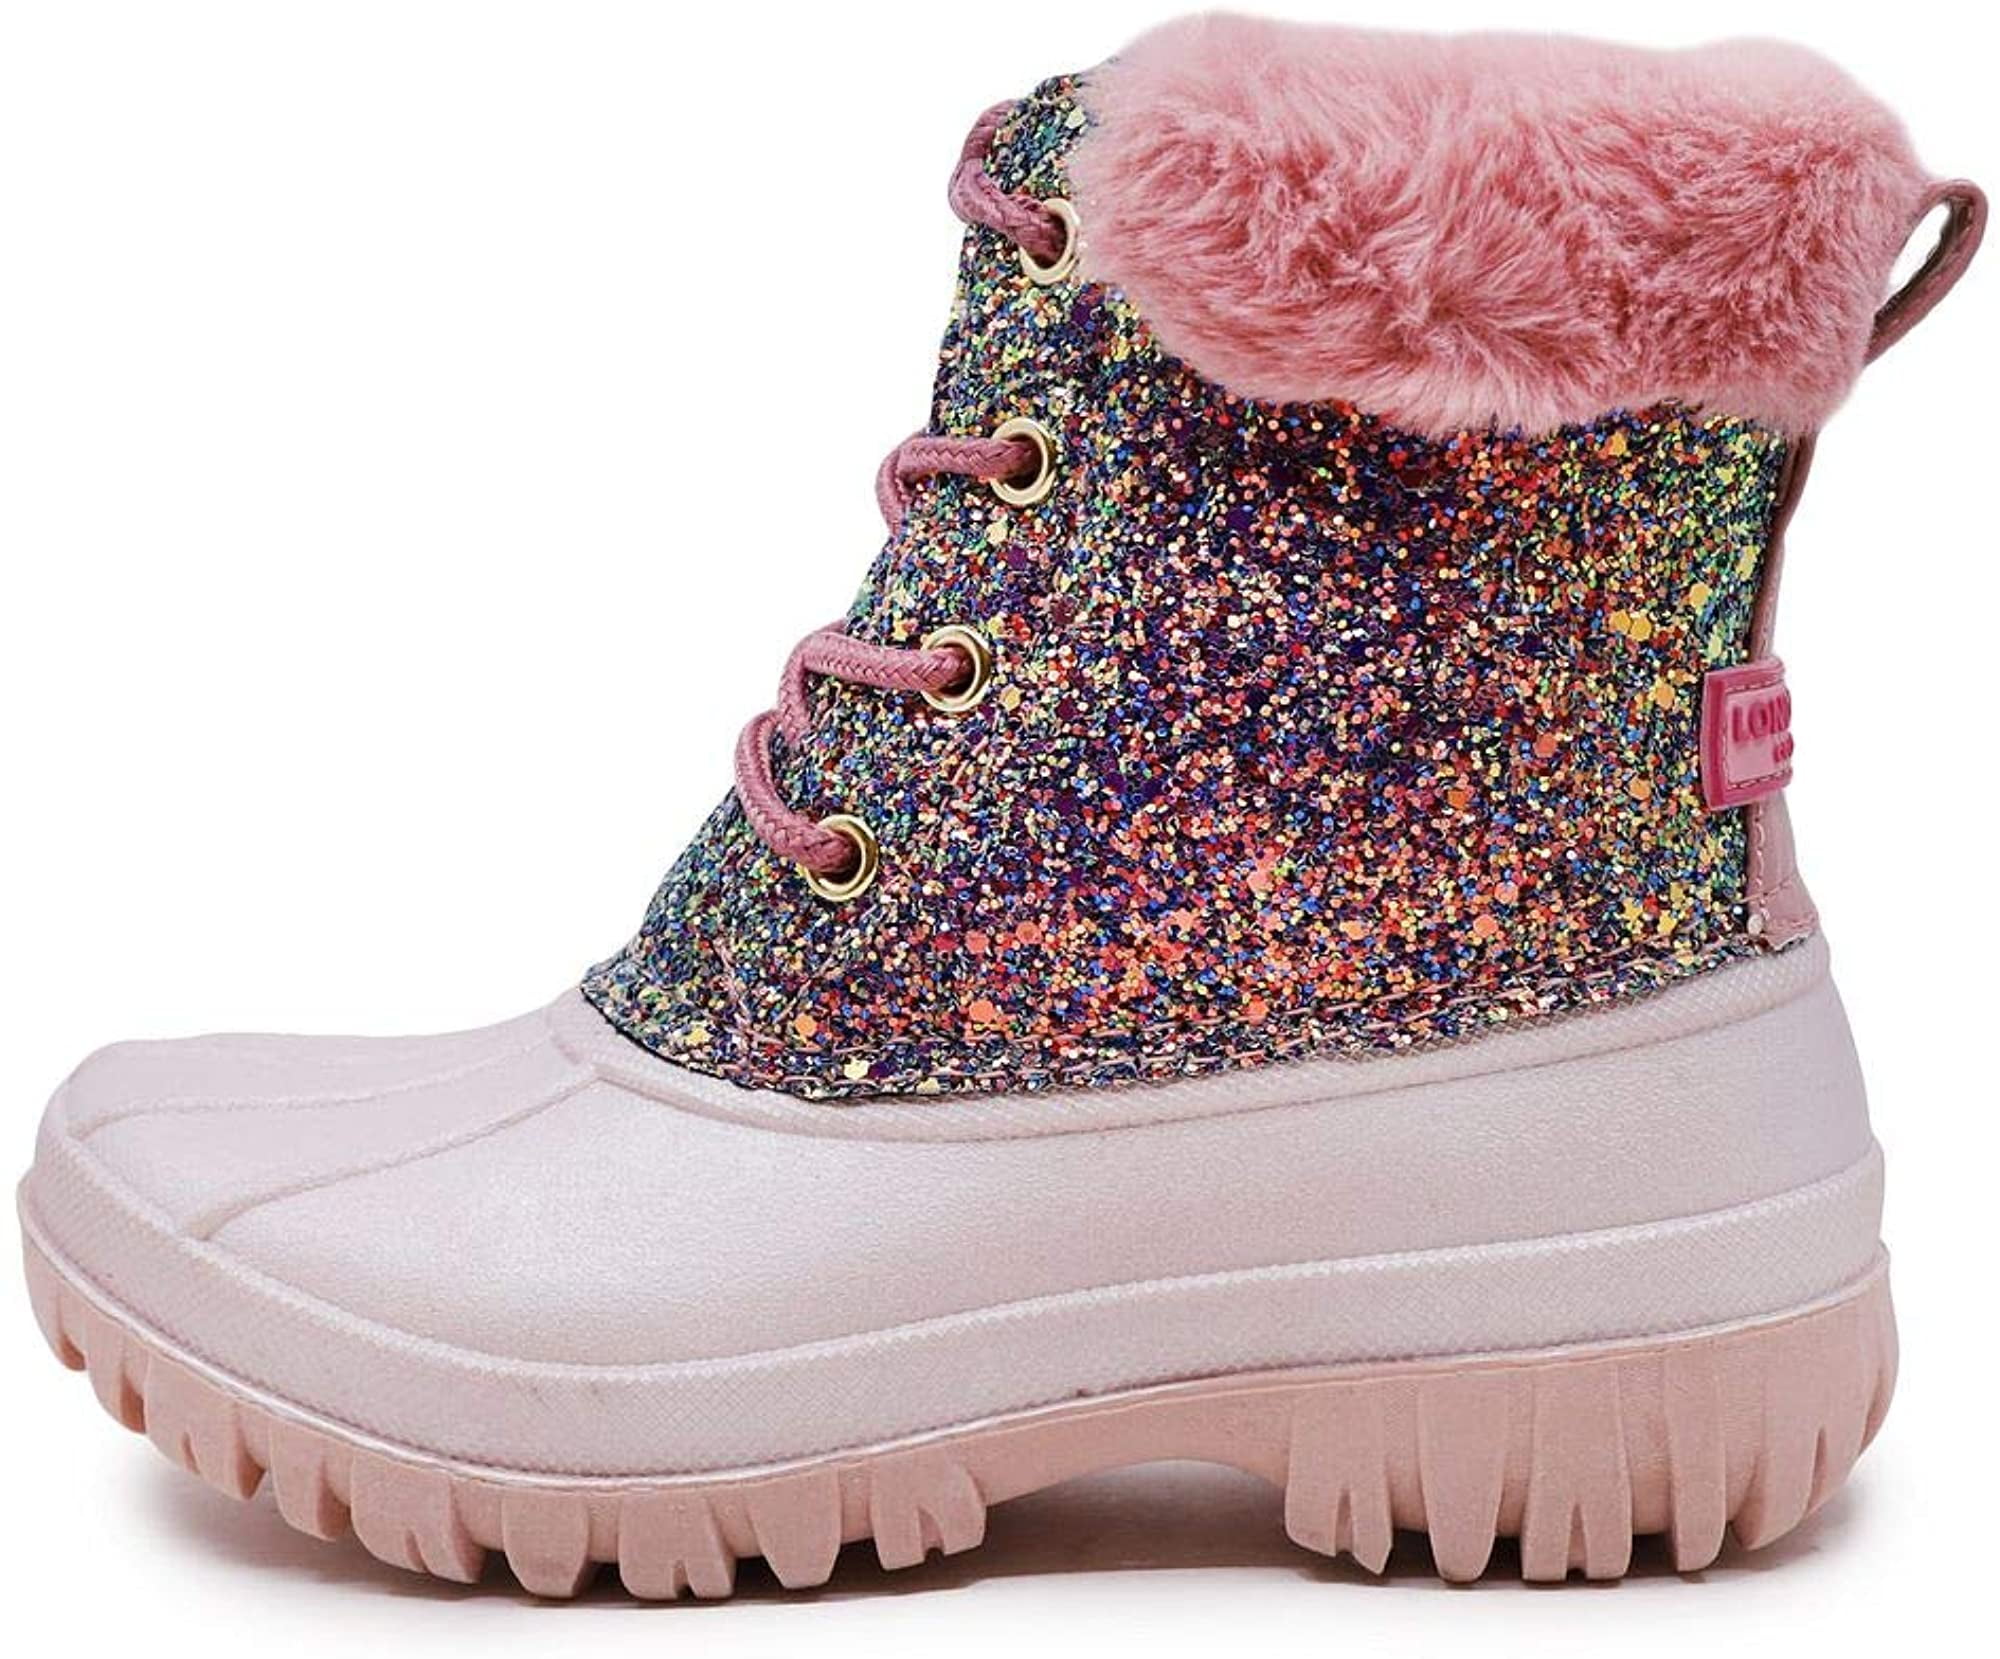 LONDON FOG Girls Stockport Cold Weather Warm Lined Snow Boot